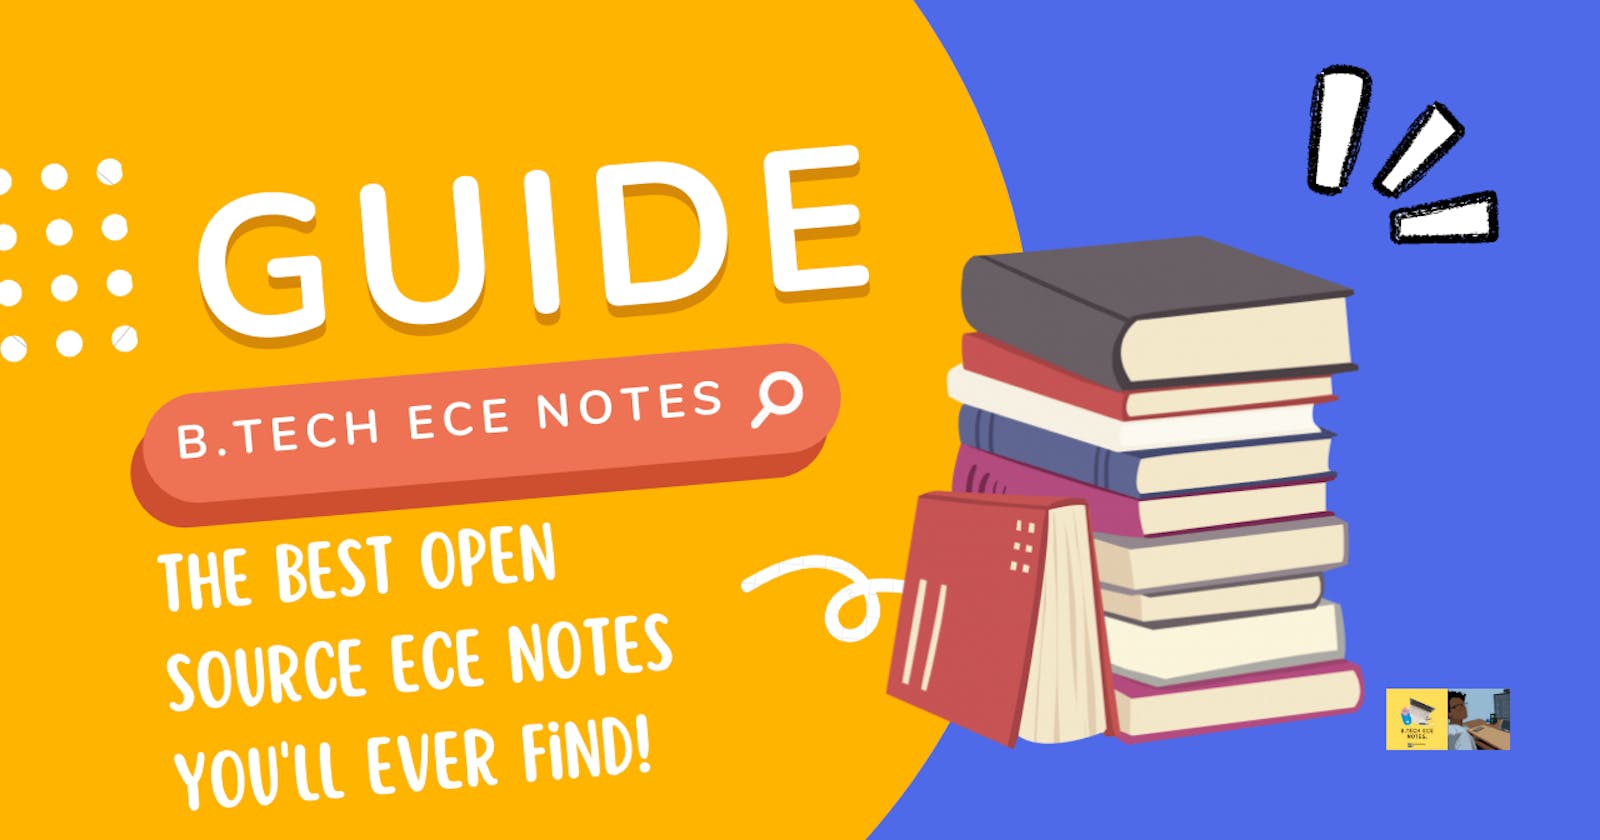 How and Where to Contribute to the ECE Notes Project?